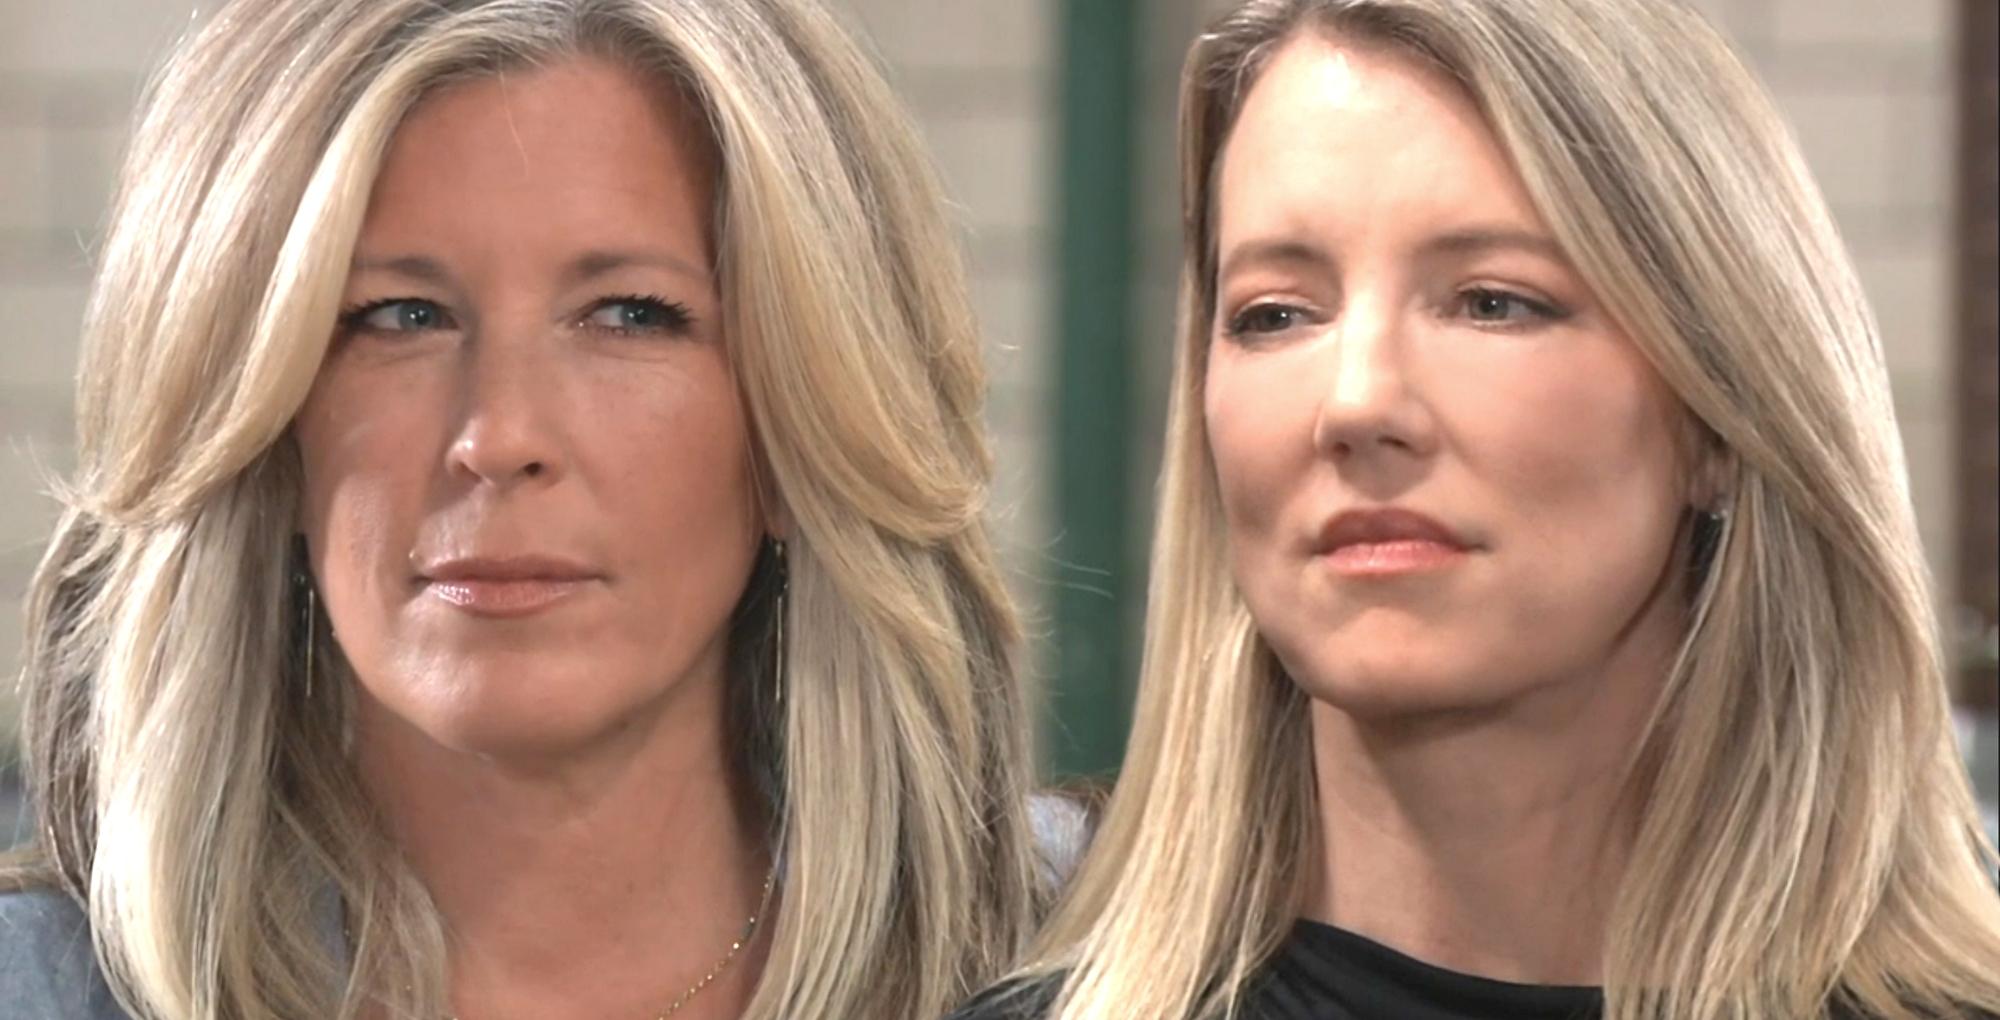 is nina reeves or carly more to blame for their general hospital feud?